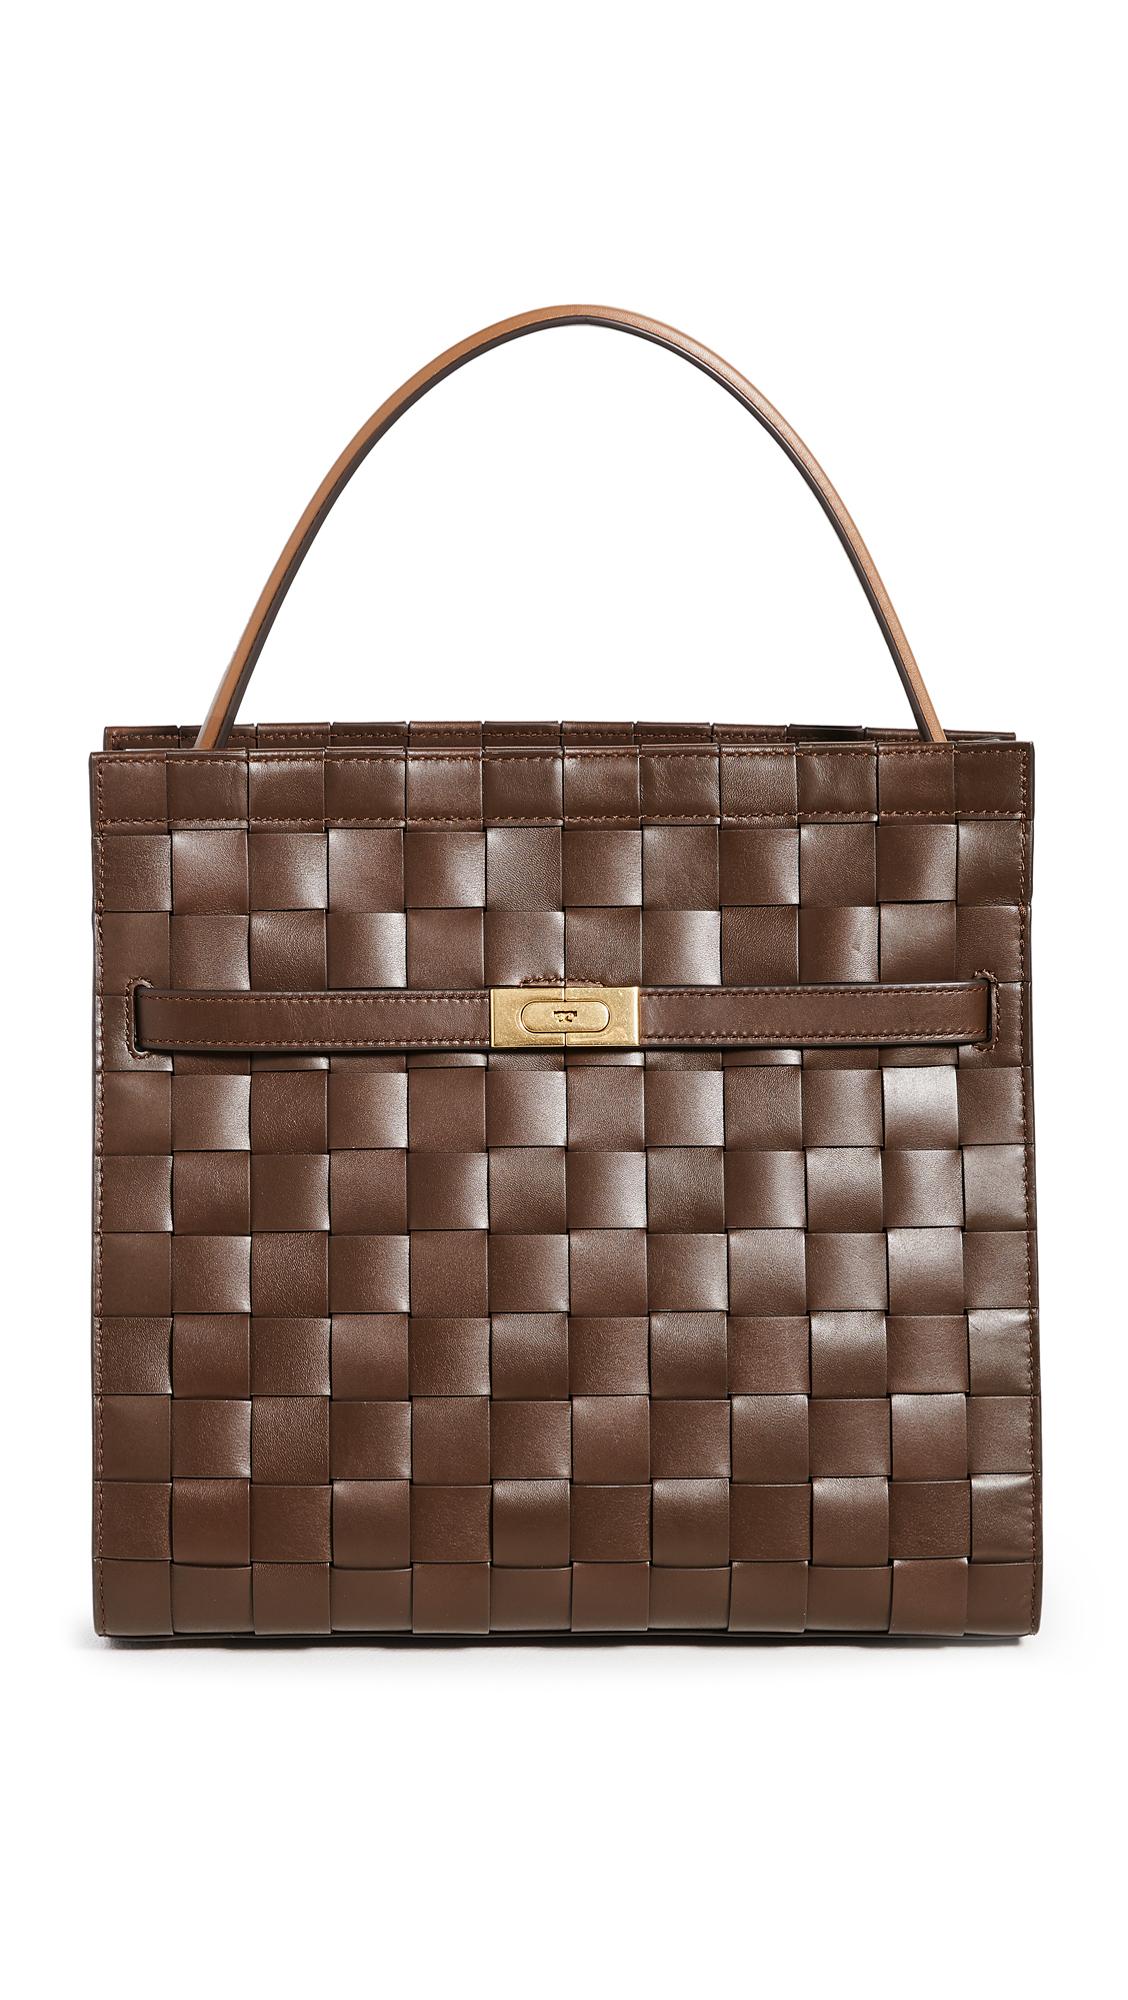 Tory Burch Lee Radziwill Woven Double Bag in Brown